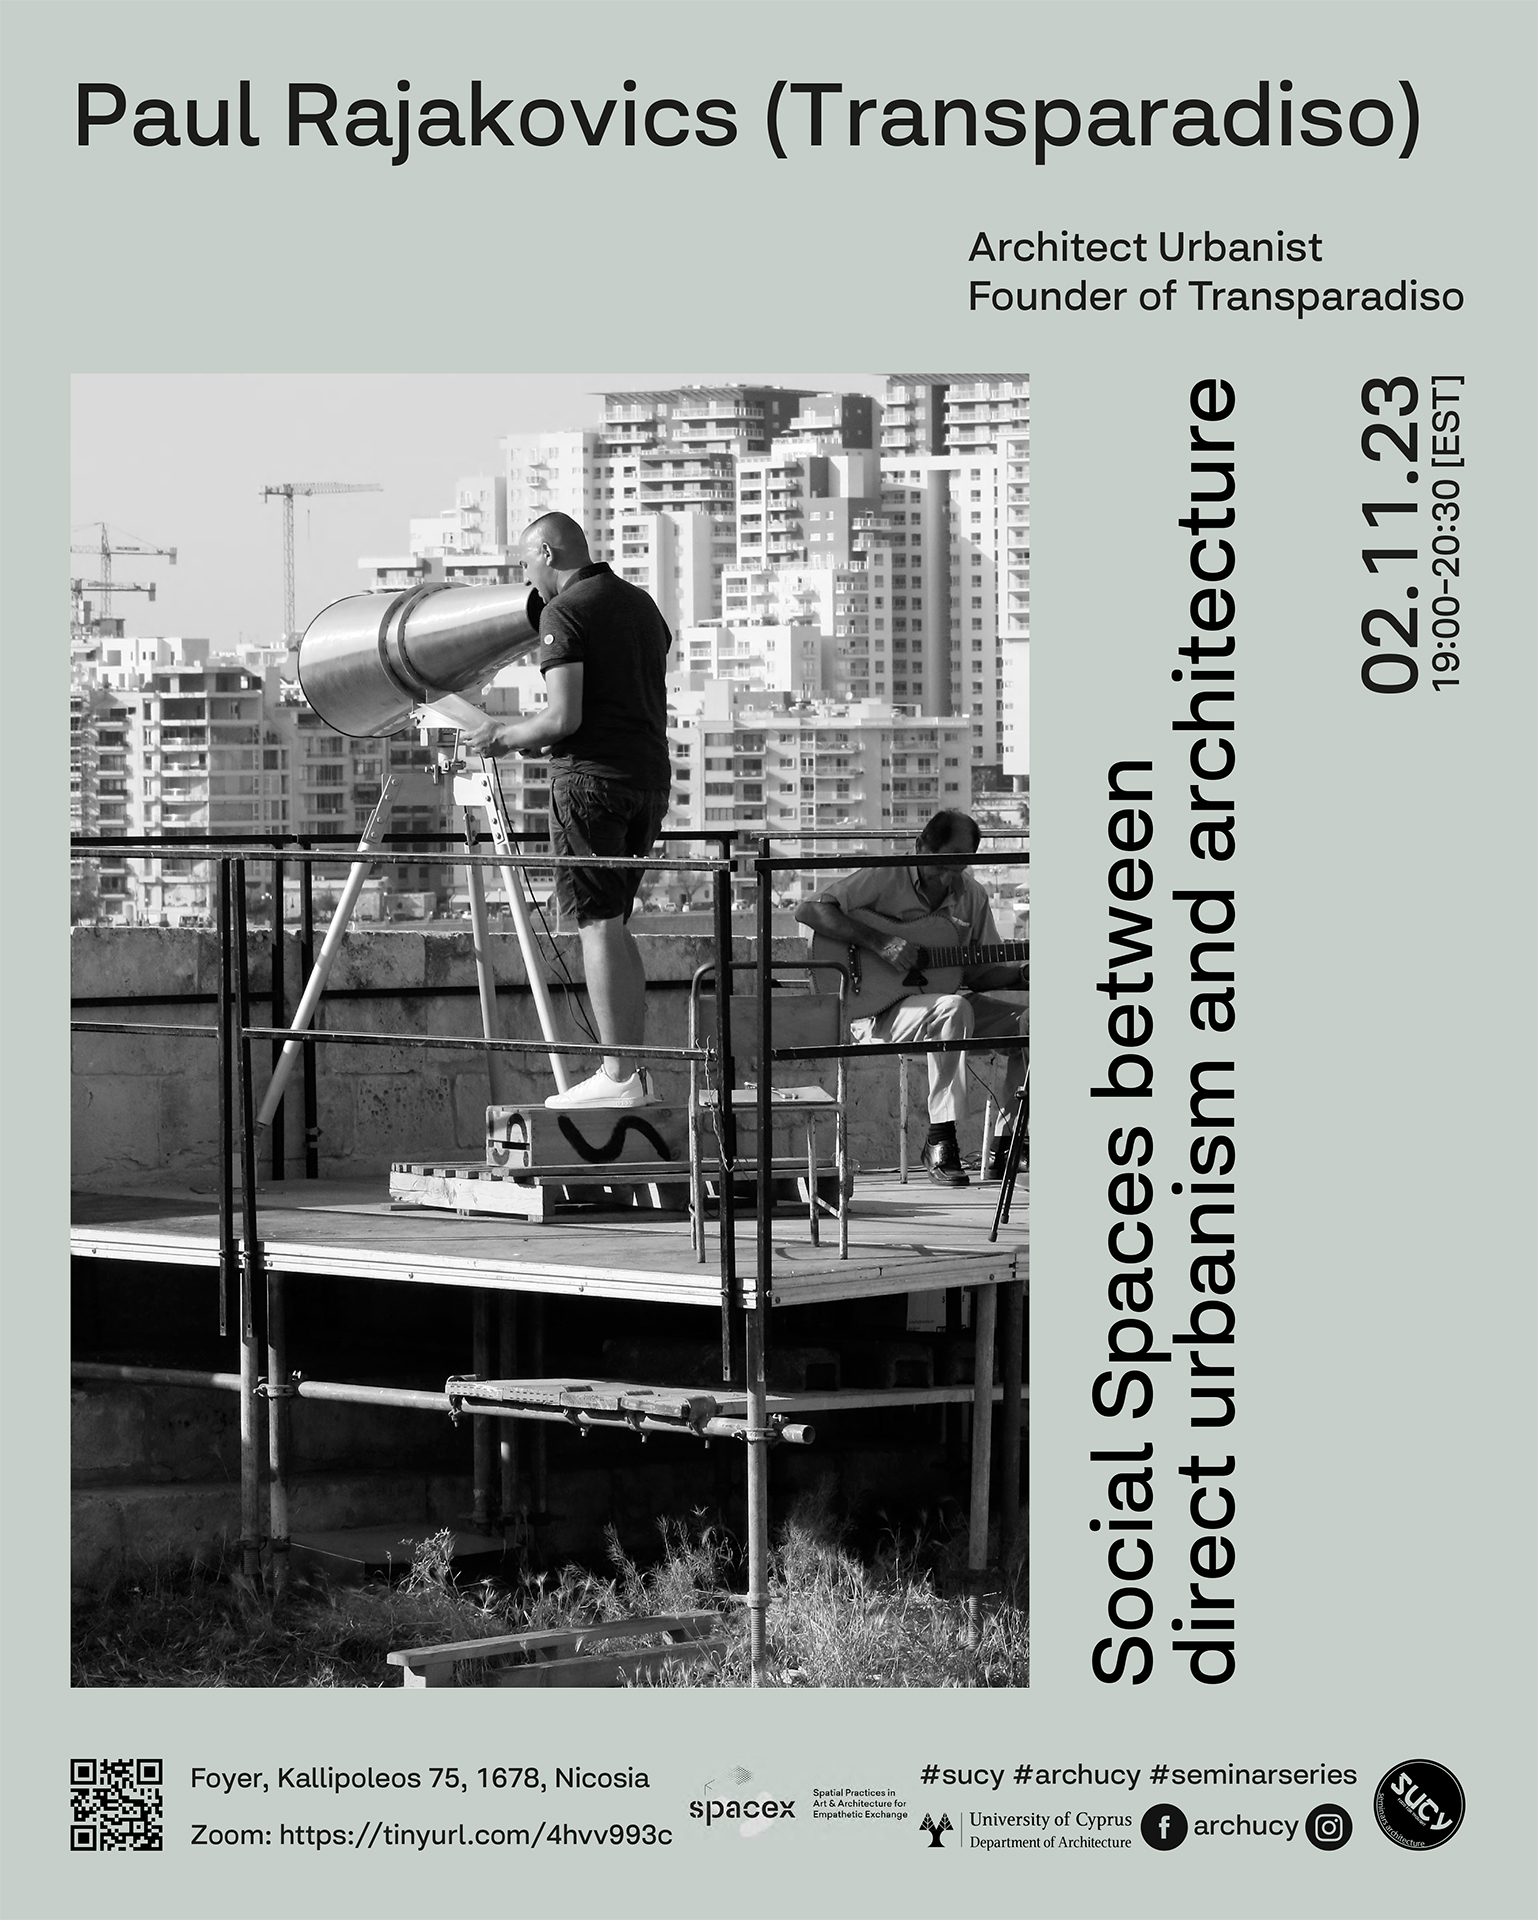 "Social Spaces Between Direct Urbanism and Architecture" / University of Cyprus: Nov.2, 19:00